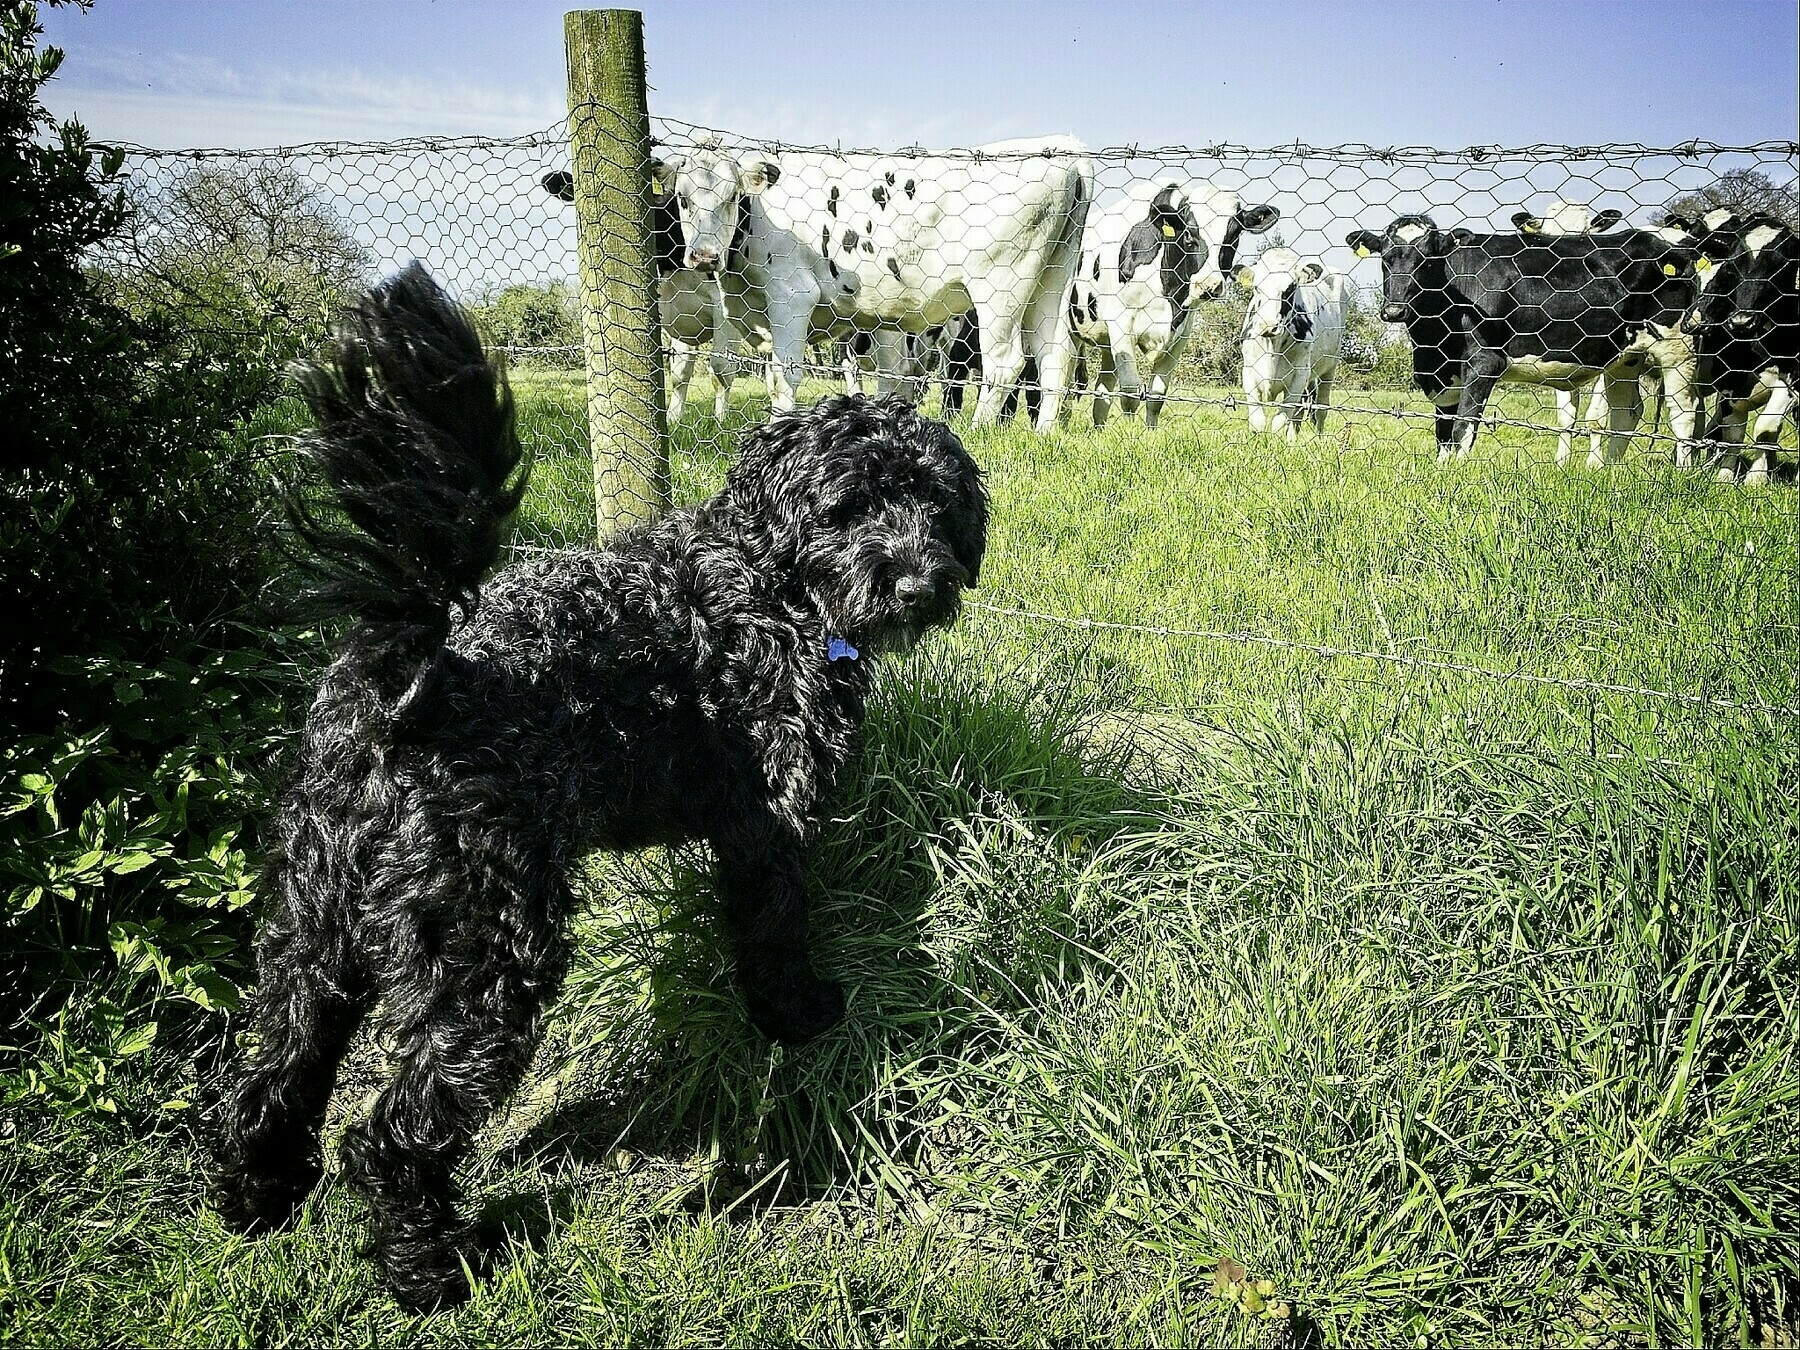 dog and cows